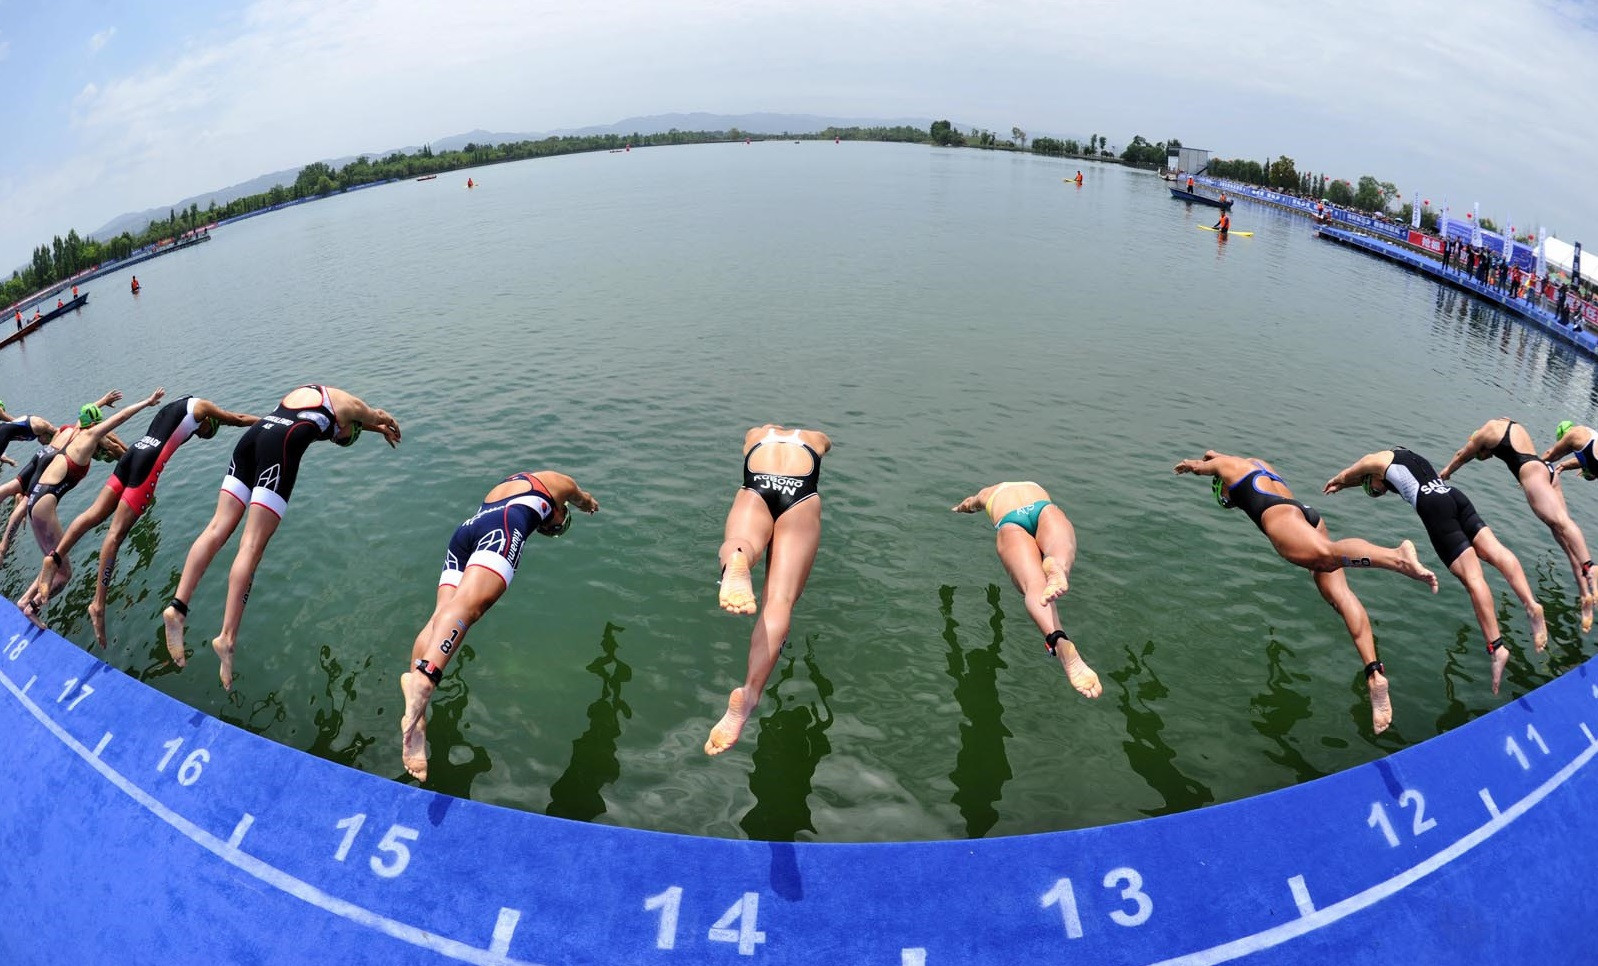 World Triathlon approved a number of events for 2021 ©World Triathlon